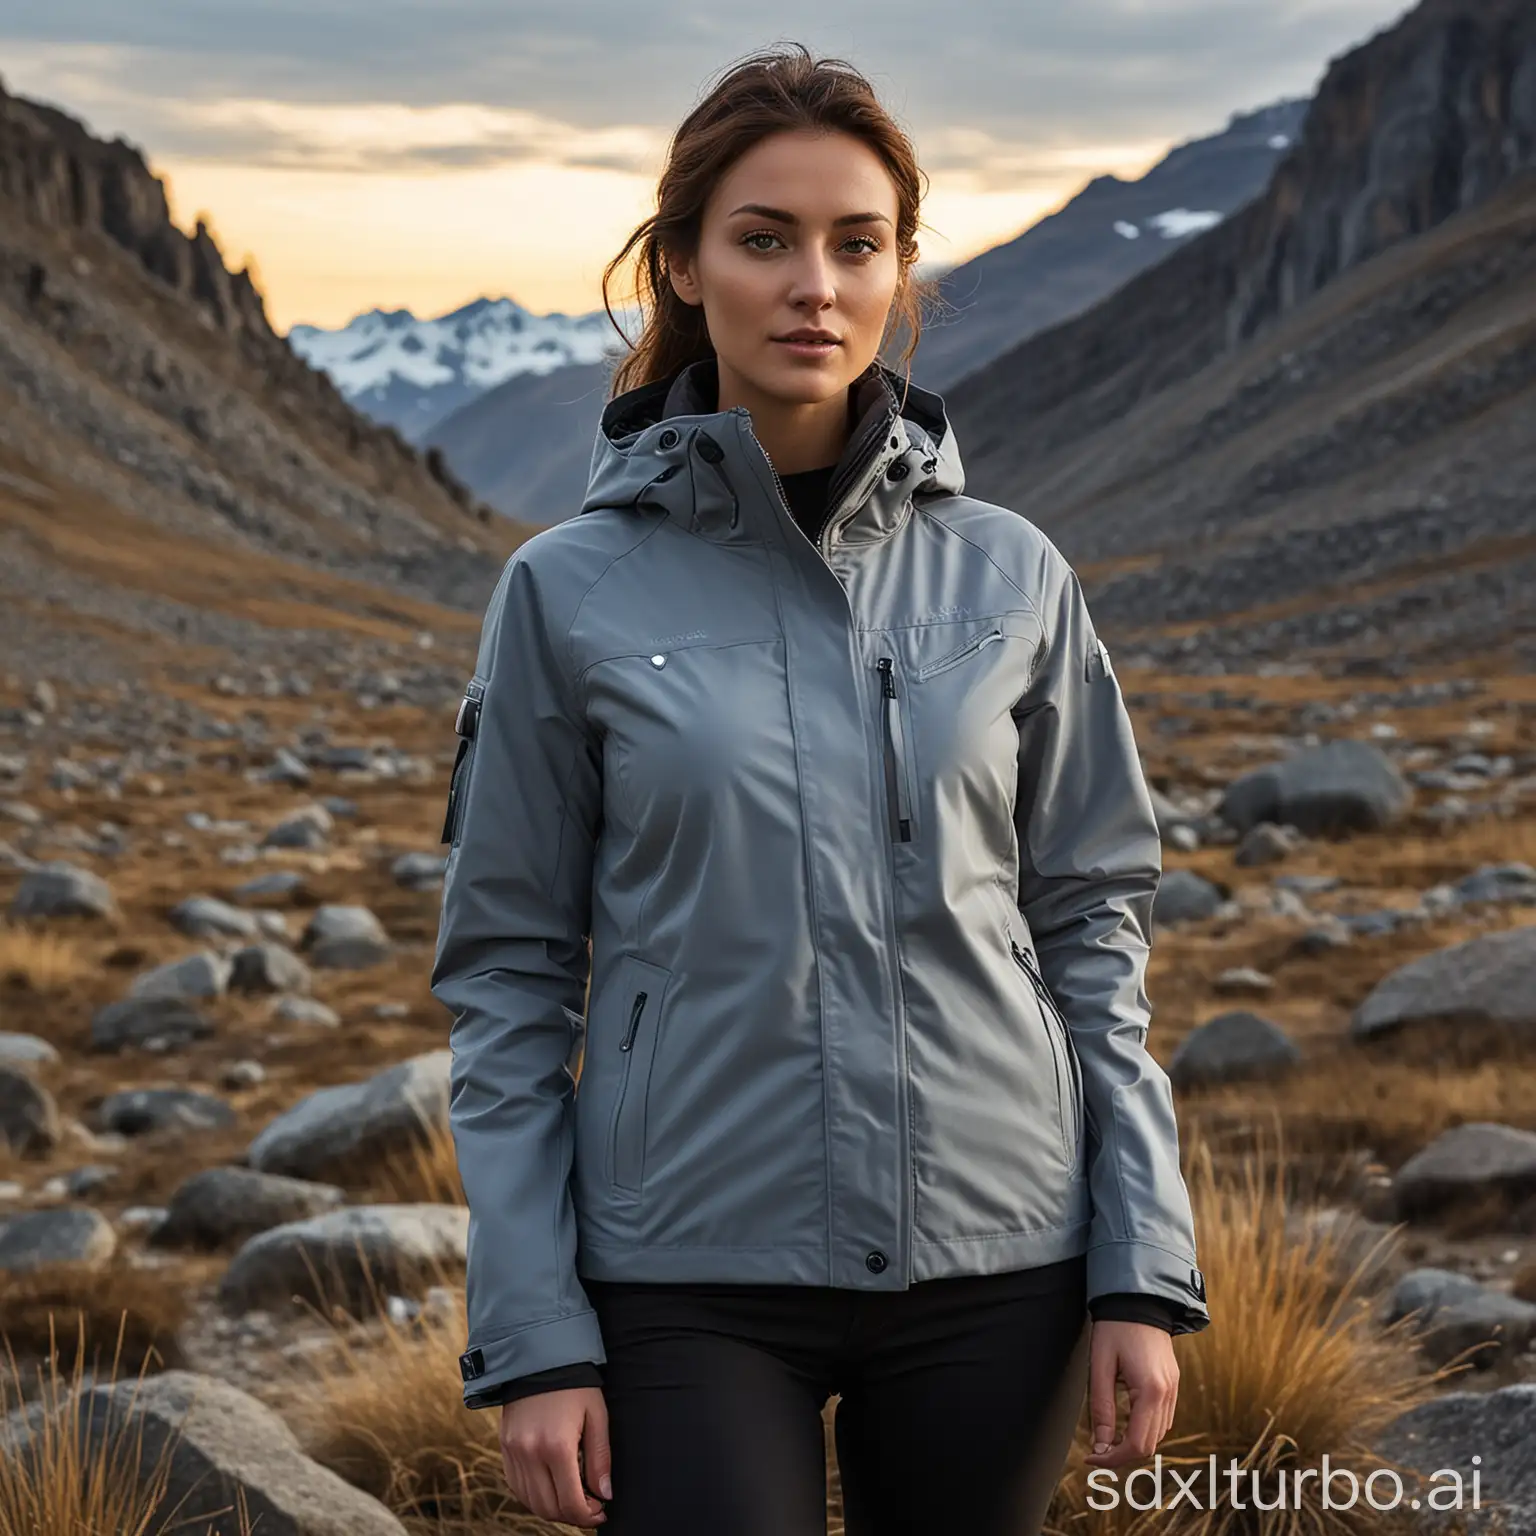 HighTech-Gray-Outdoor-Jacket-for-Exploration-and-Adventure